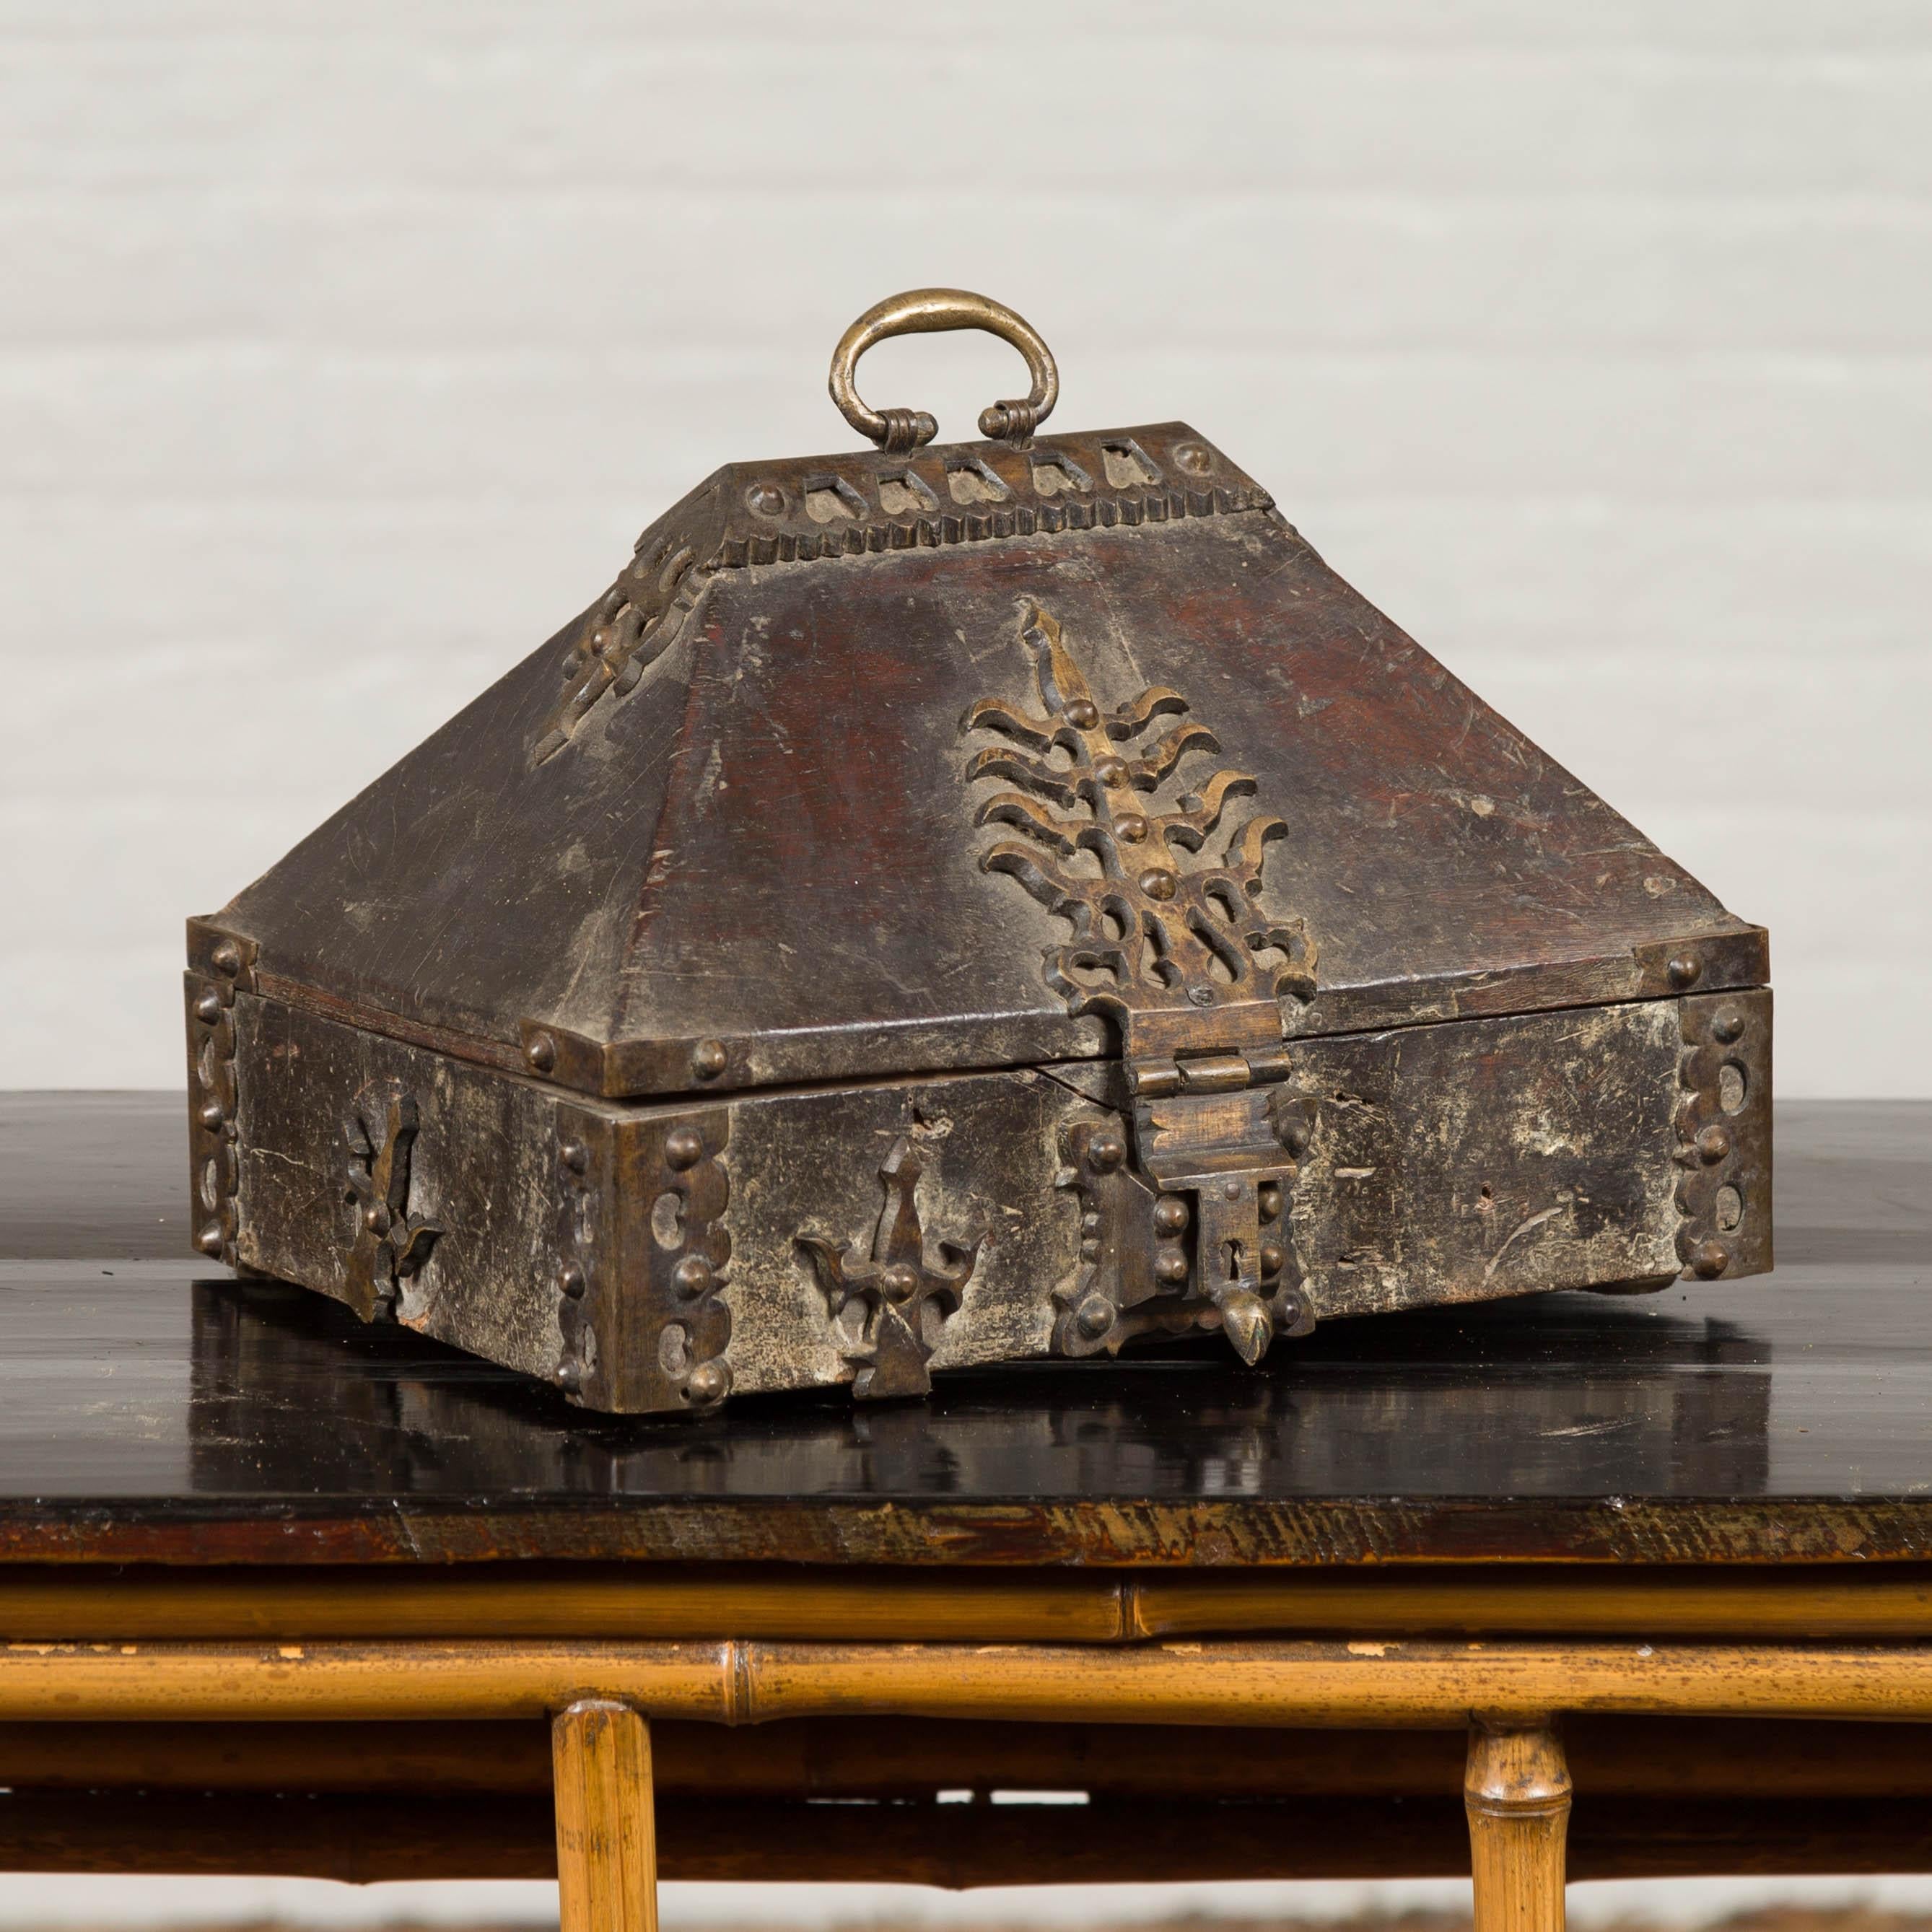 An unusual Indian antique treasure box used as a merchant's chest with iron decor and weathered patina. Our eye is immediately attracted to the lines and exquisite decor of this treasure box, adorned with iron motifs. A pyramidal lid topped with